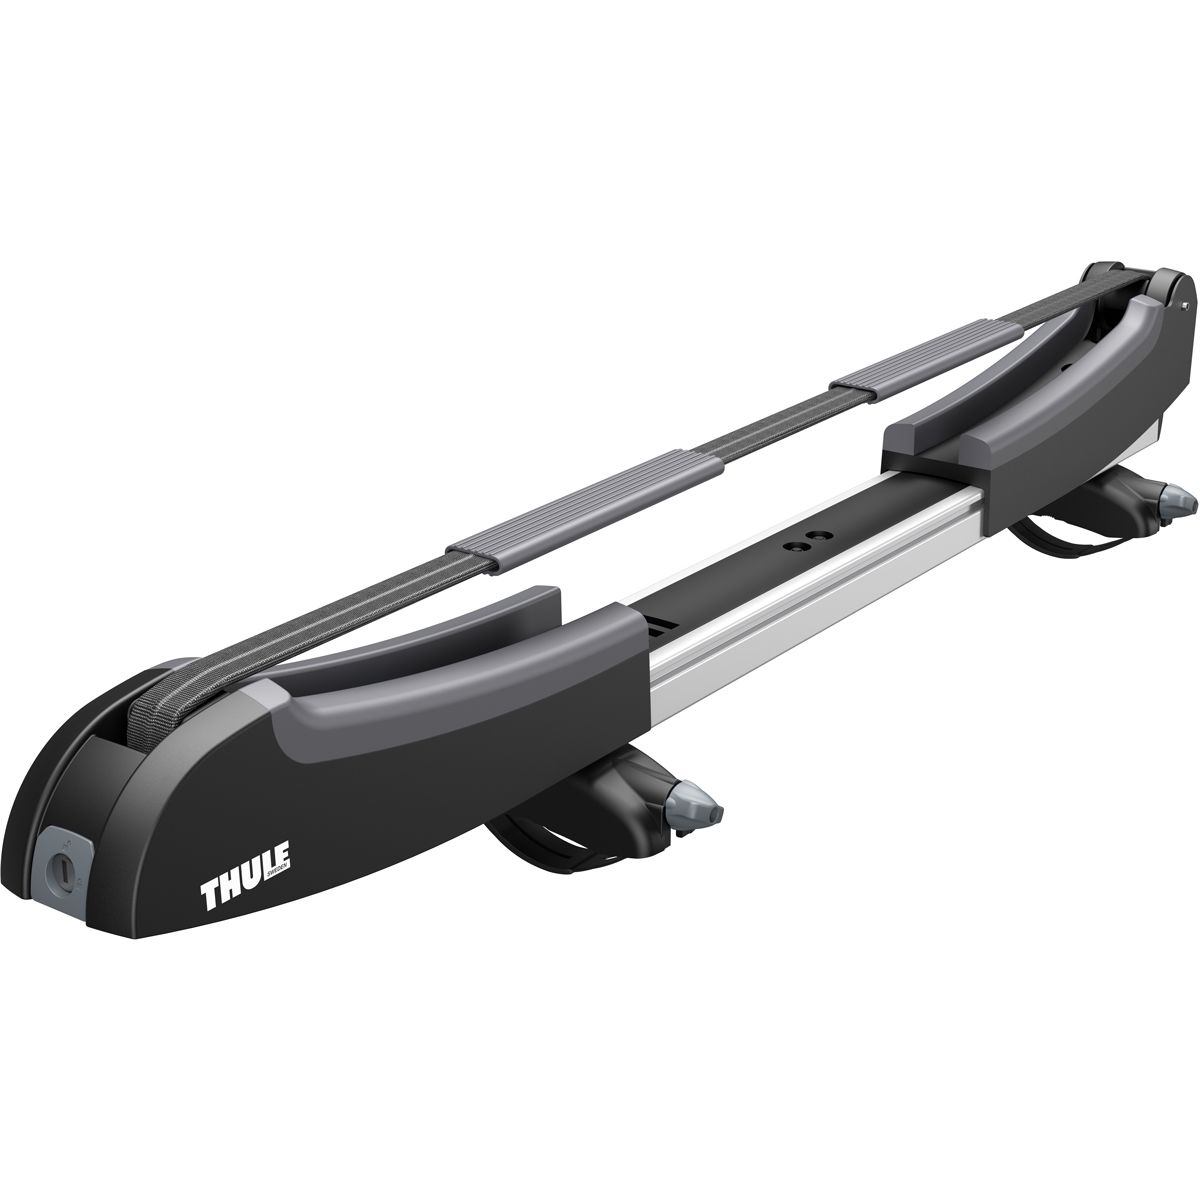 Thule Taxi Surf - Accessories